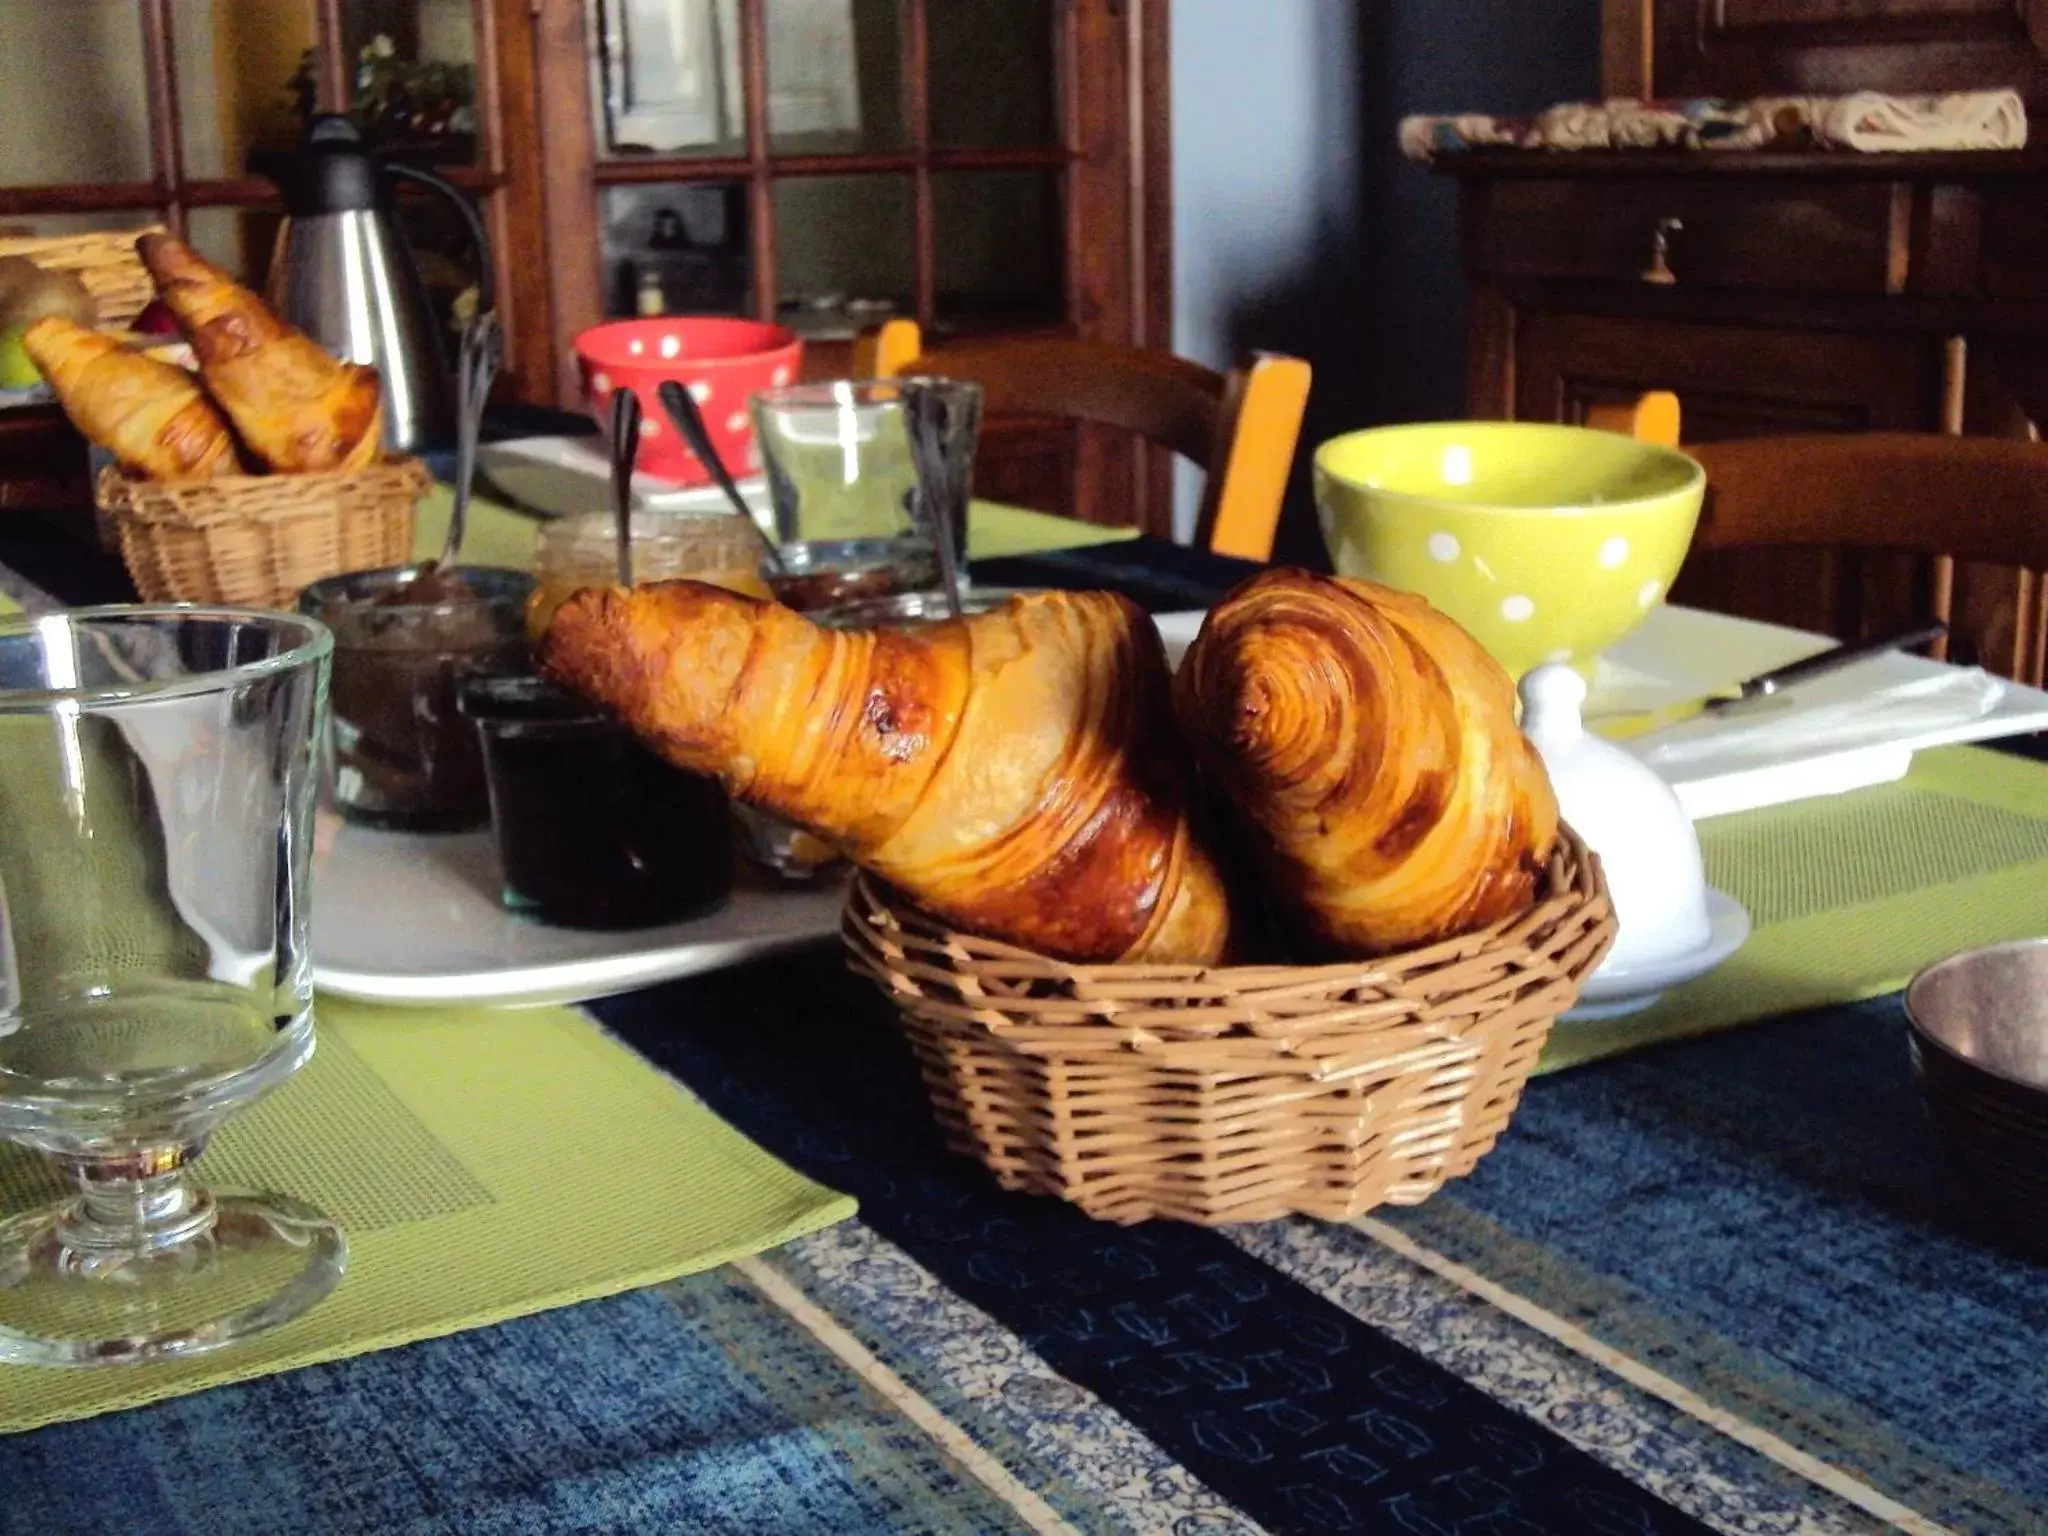 Continental breakfast in Les Chambres des Dames